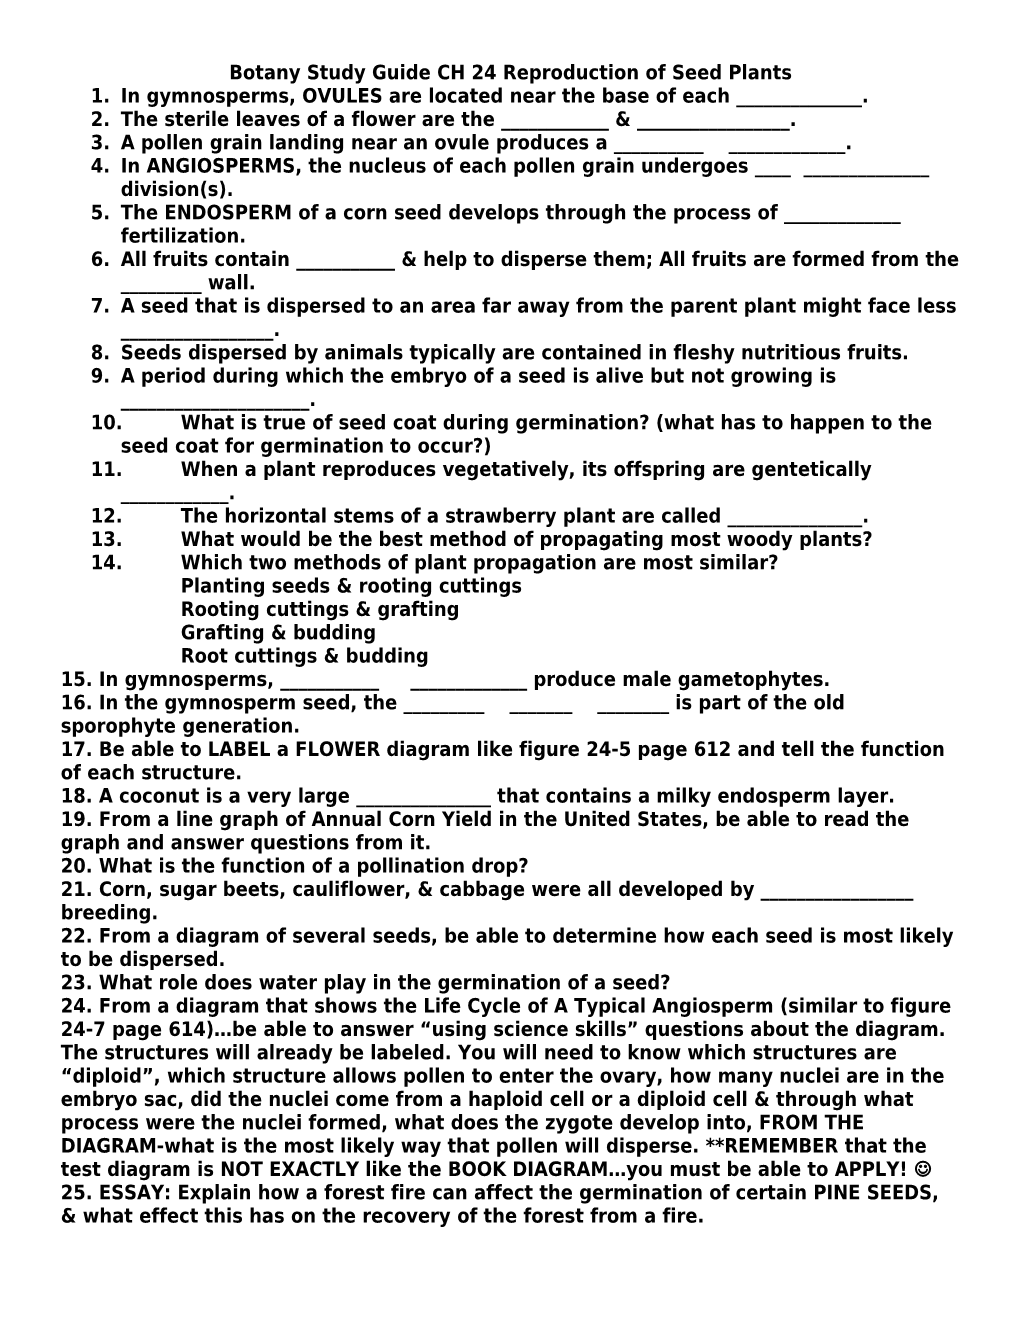 Botany Study Guide CH 24 Reproduction of Seed Plants